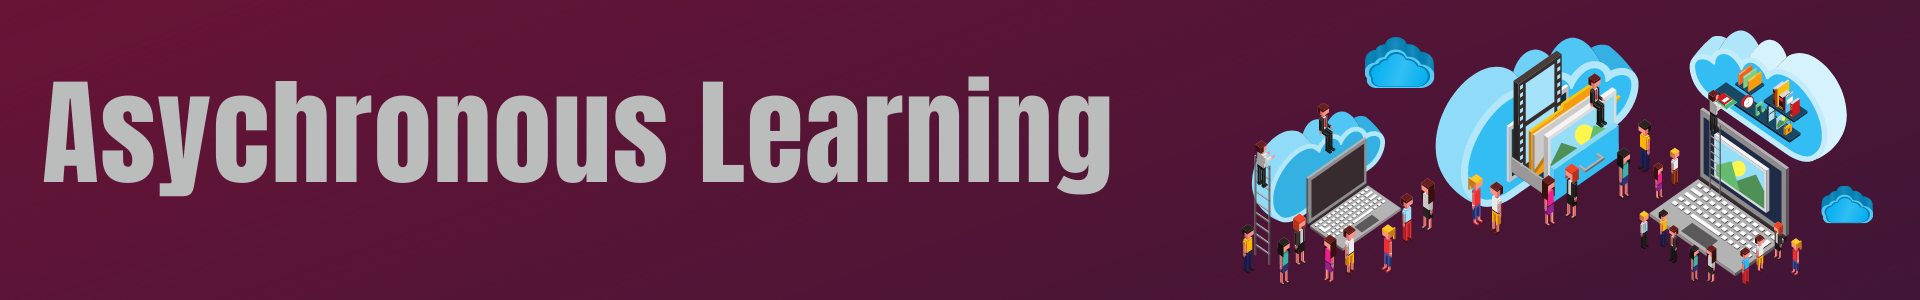 Asynchronous Learning banner